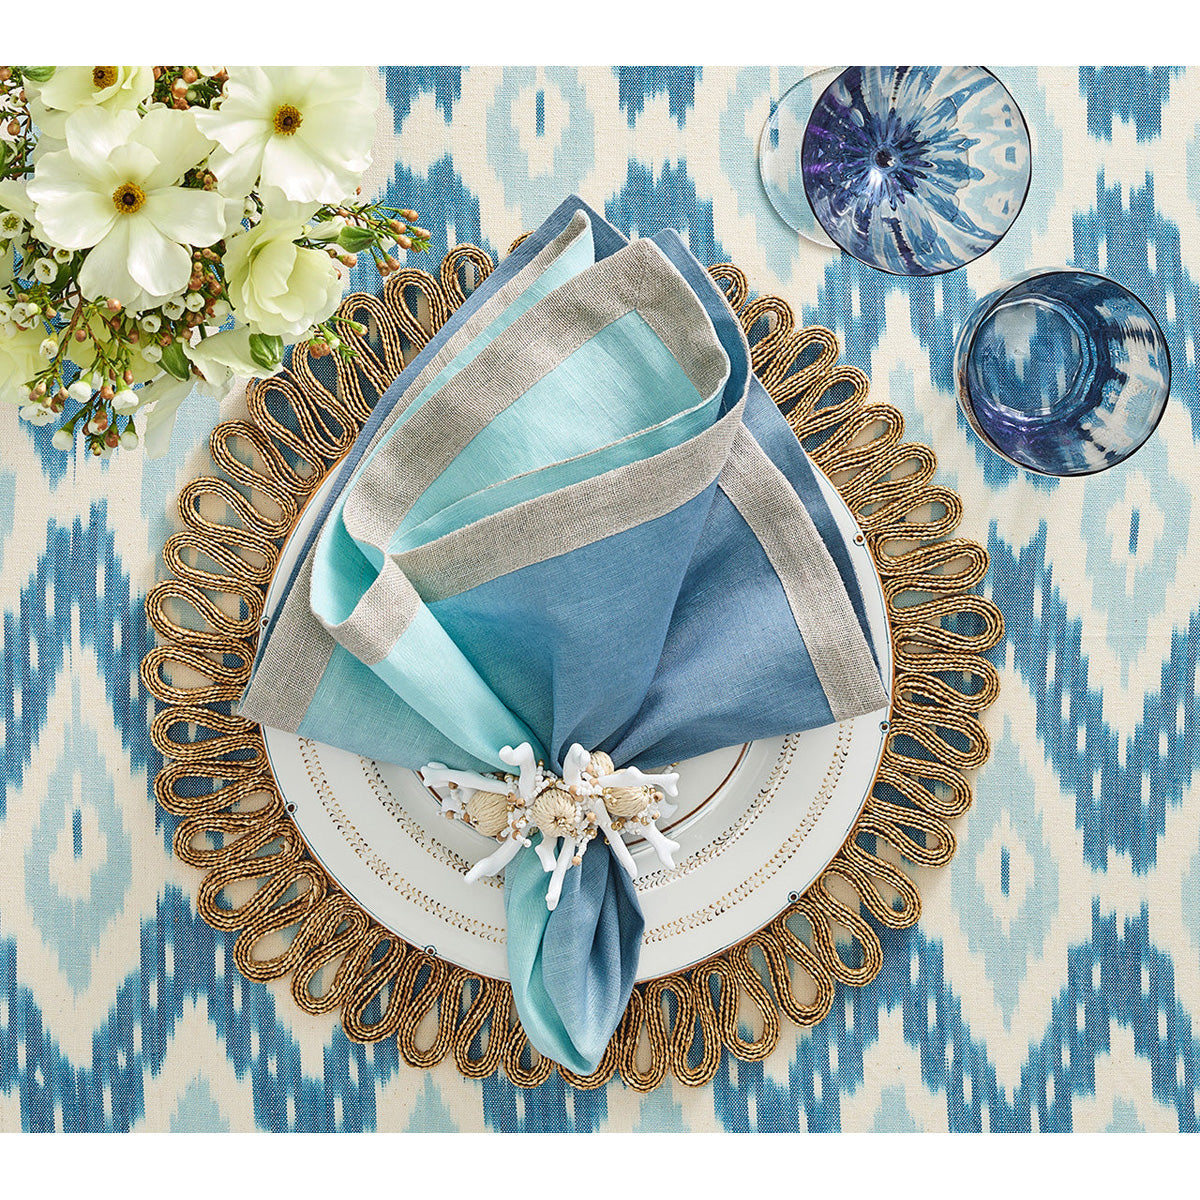 Boho Placemat in Natural - Set of 4 by Kim Seybert Additional Image-1